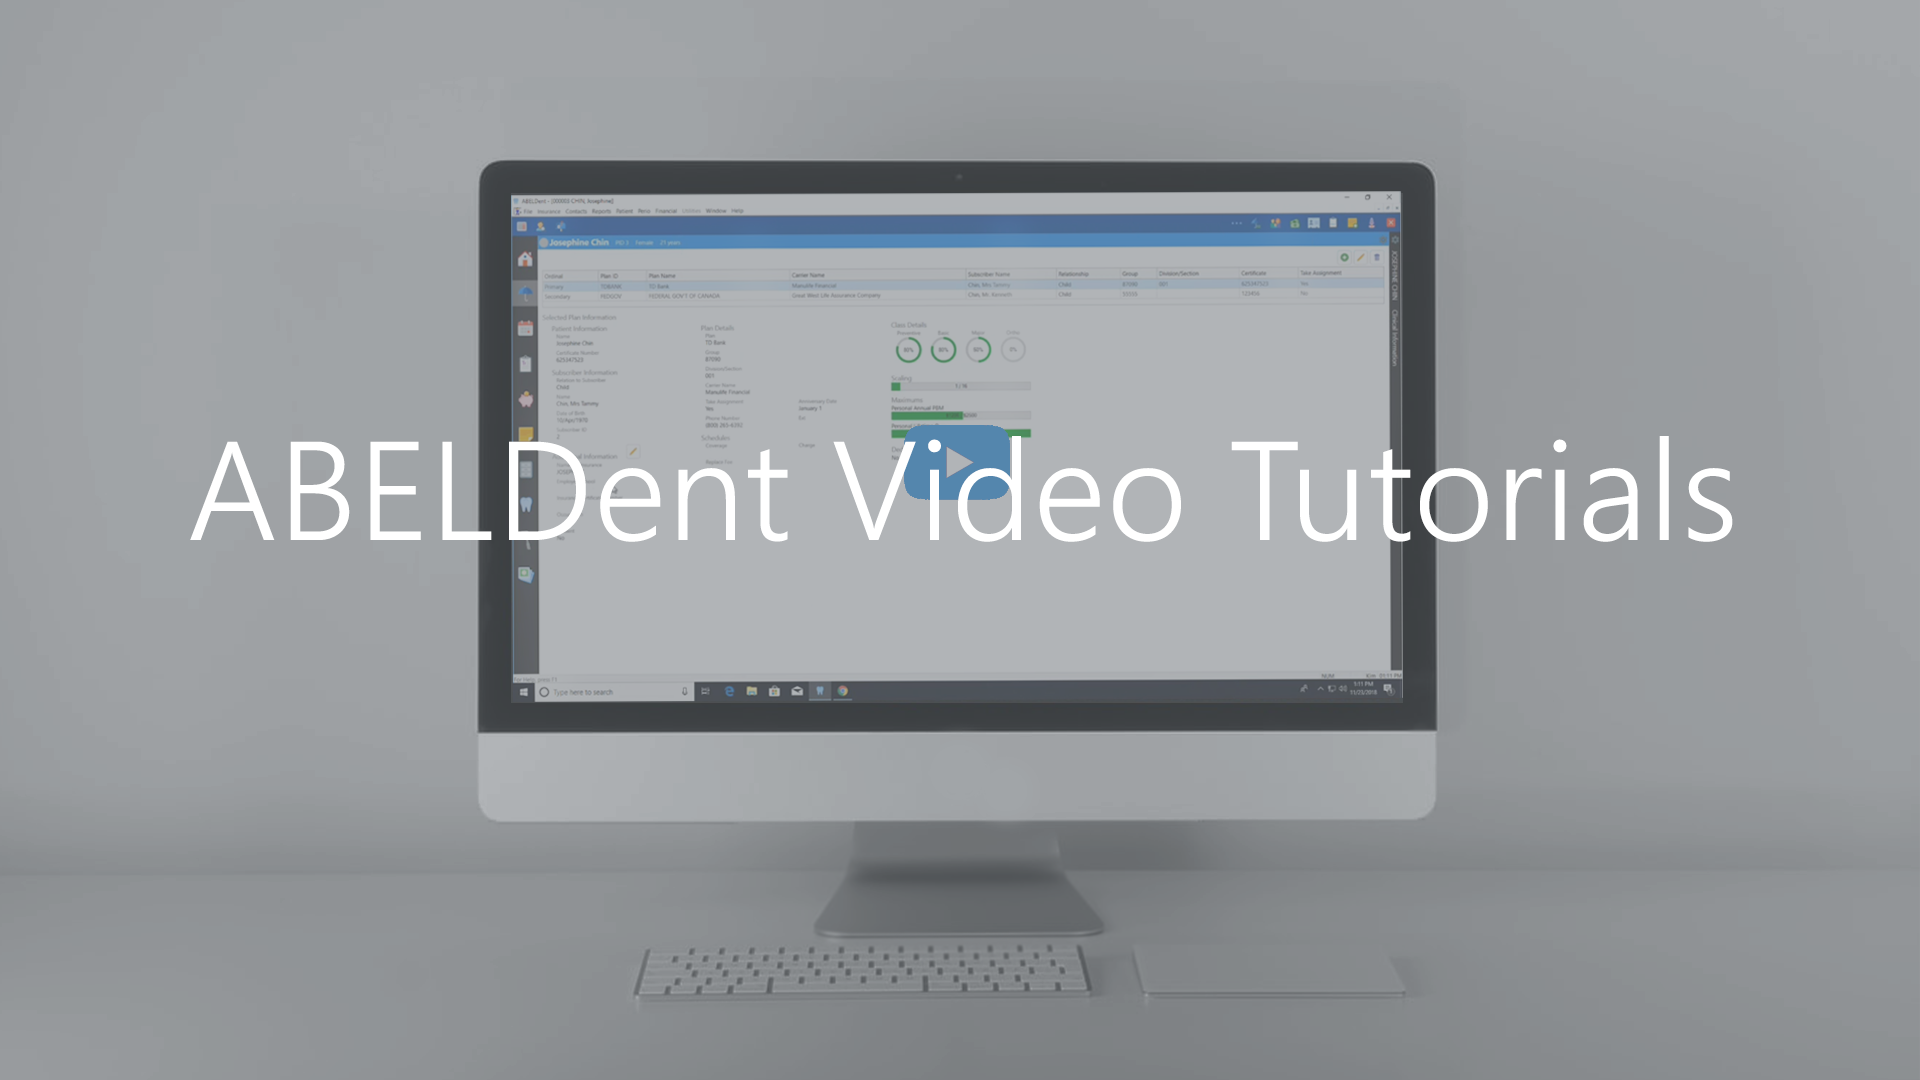 ABELDent’s Exciting New Features: Video Tutorials